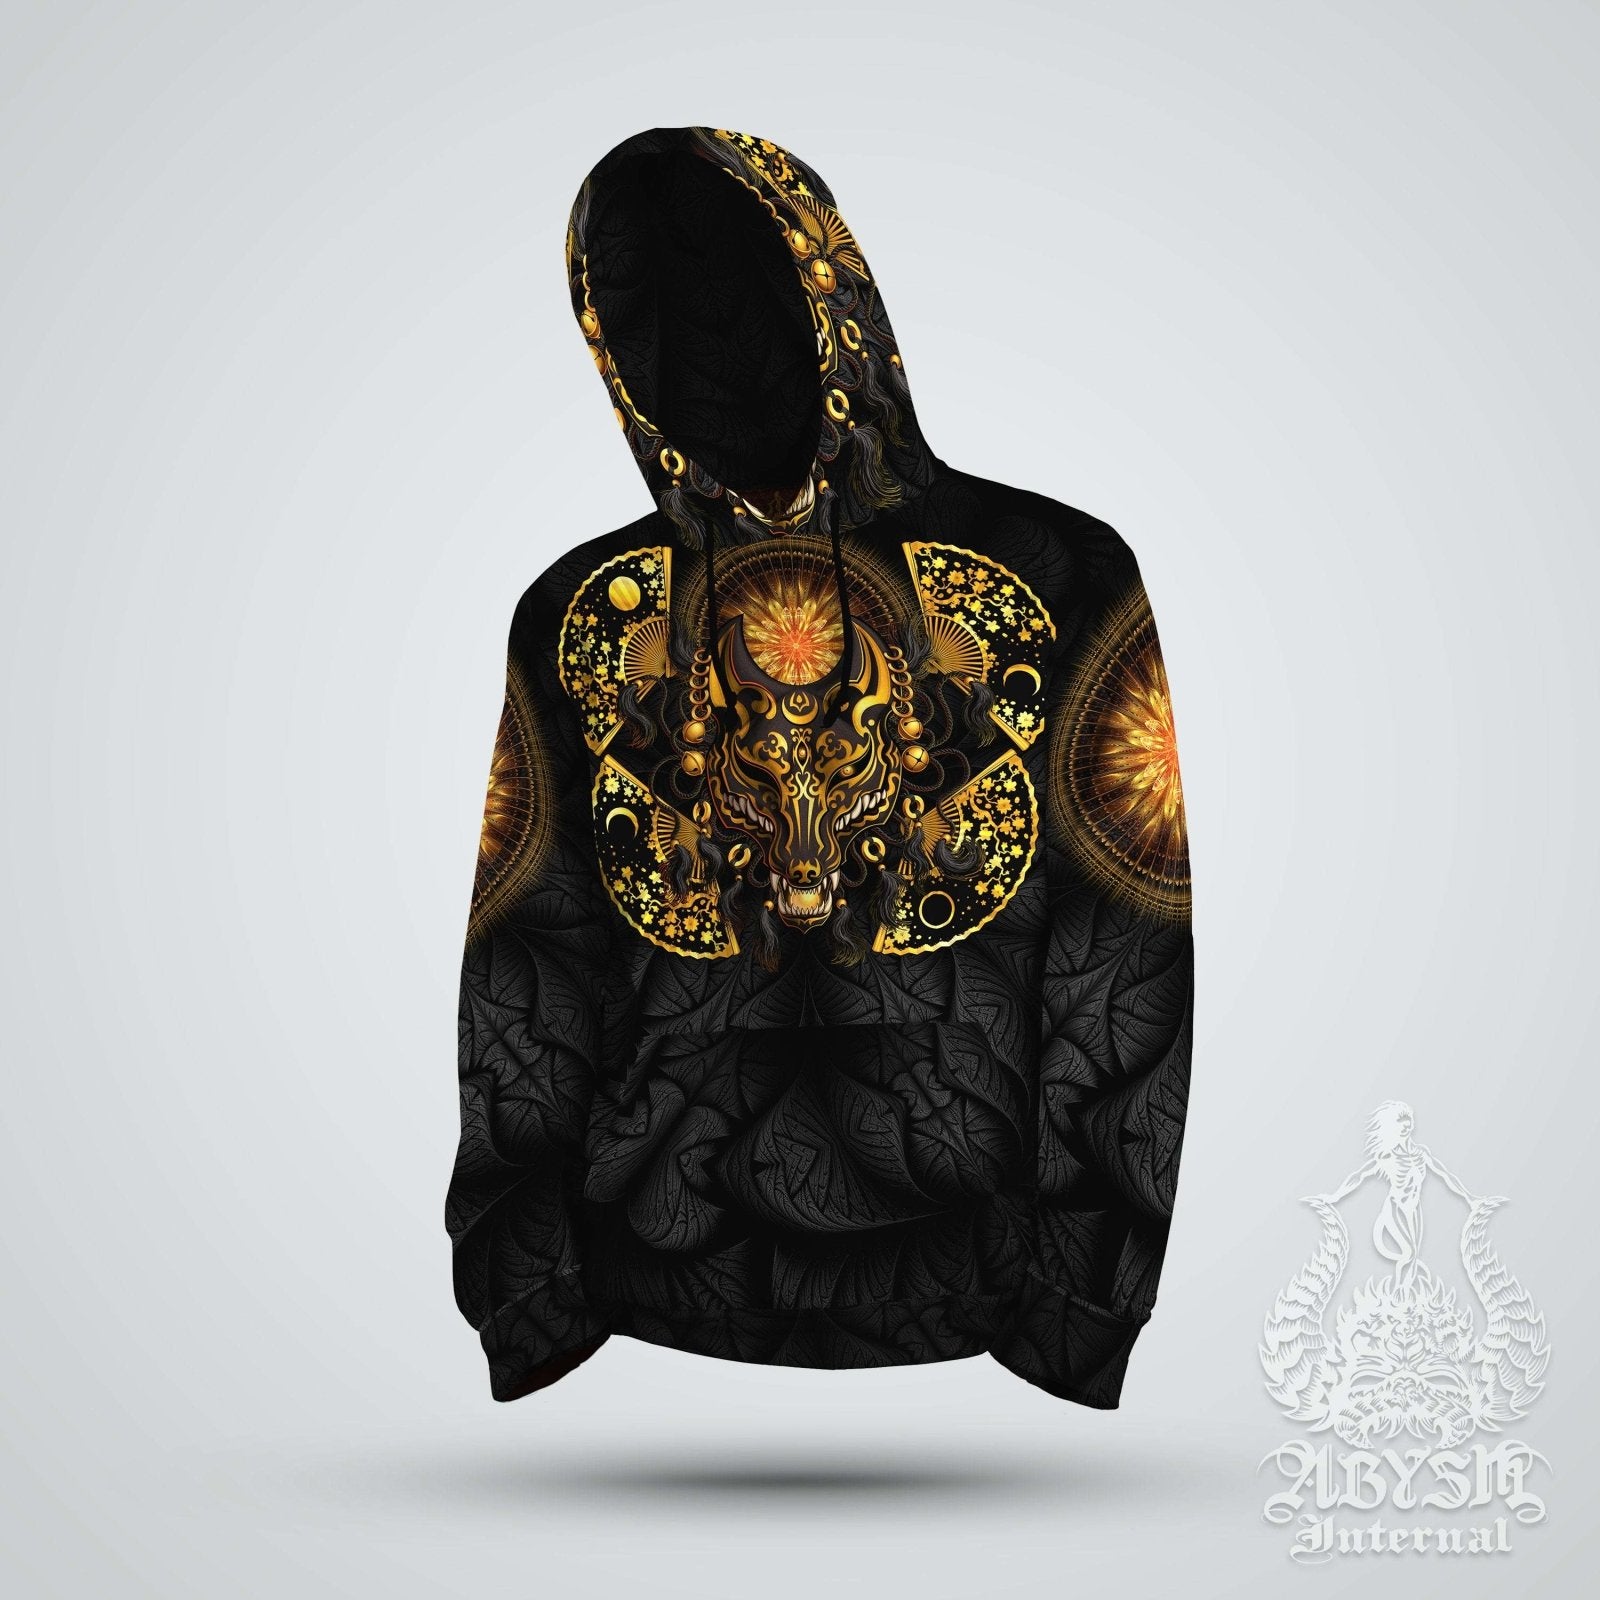 Anime Hoodie, Street Outfit, Japanese Streetwear, Gamer Apparel, Alternative Clothing, Unisex - Fox or Kitsune Mask, Black and Gold - Abysm Internal